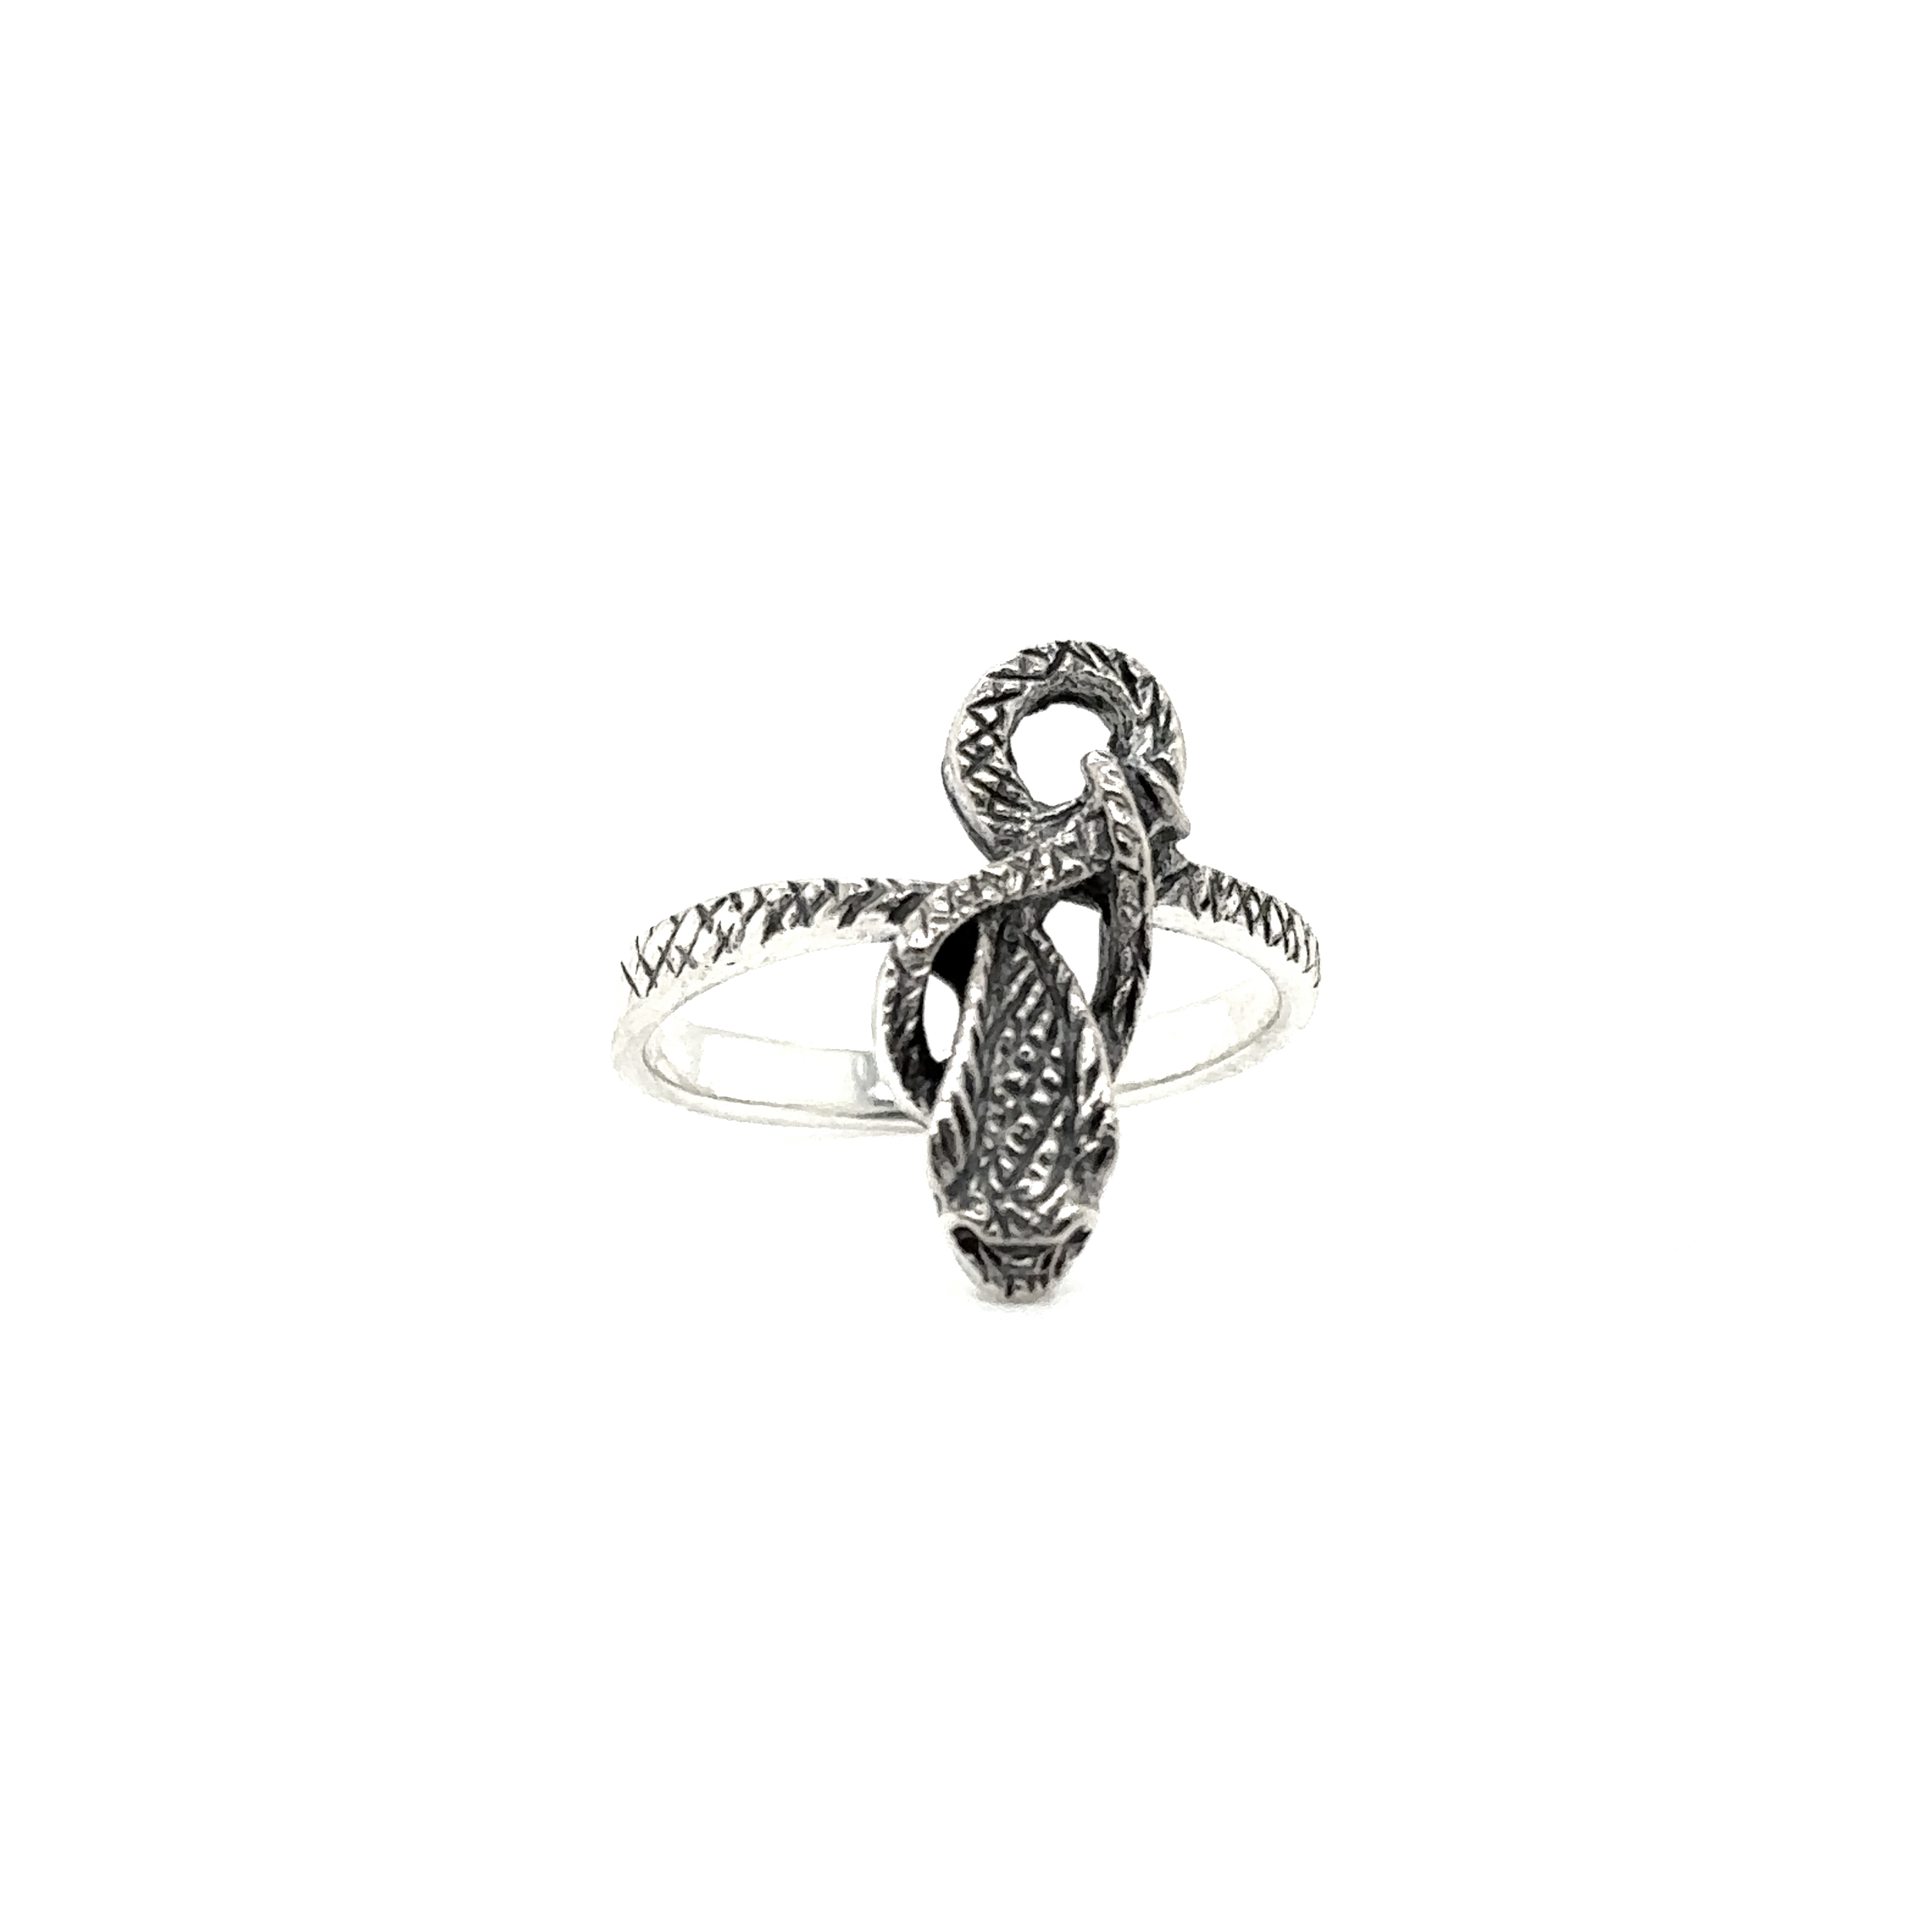 Sterling Silver Snake Ring, Faceted Black CZ, Realistic Texture of a Snake,  Size 7 (Adjustable), 9.80 Grams. Original